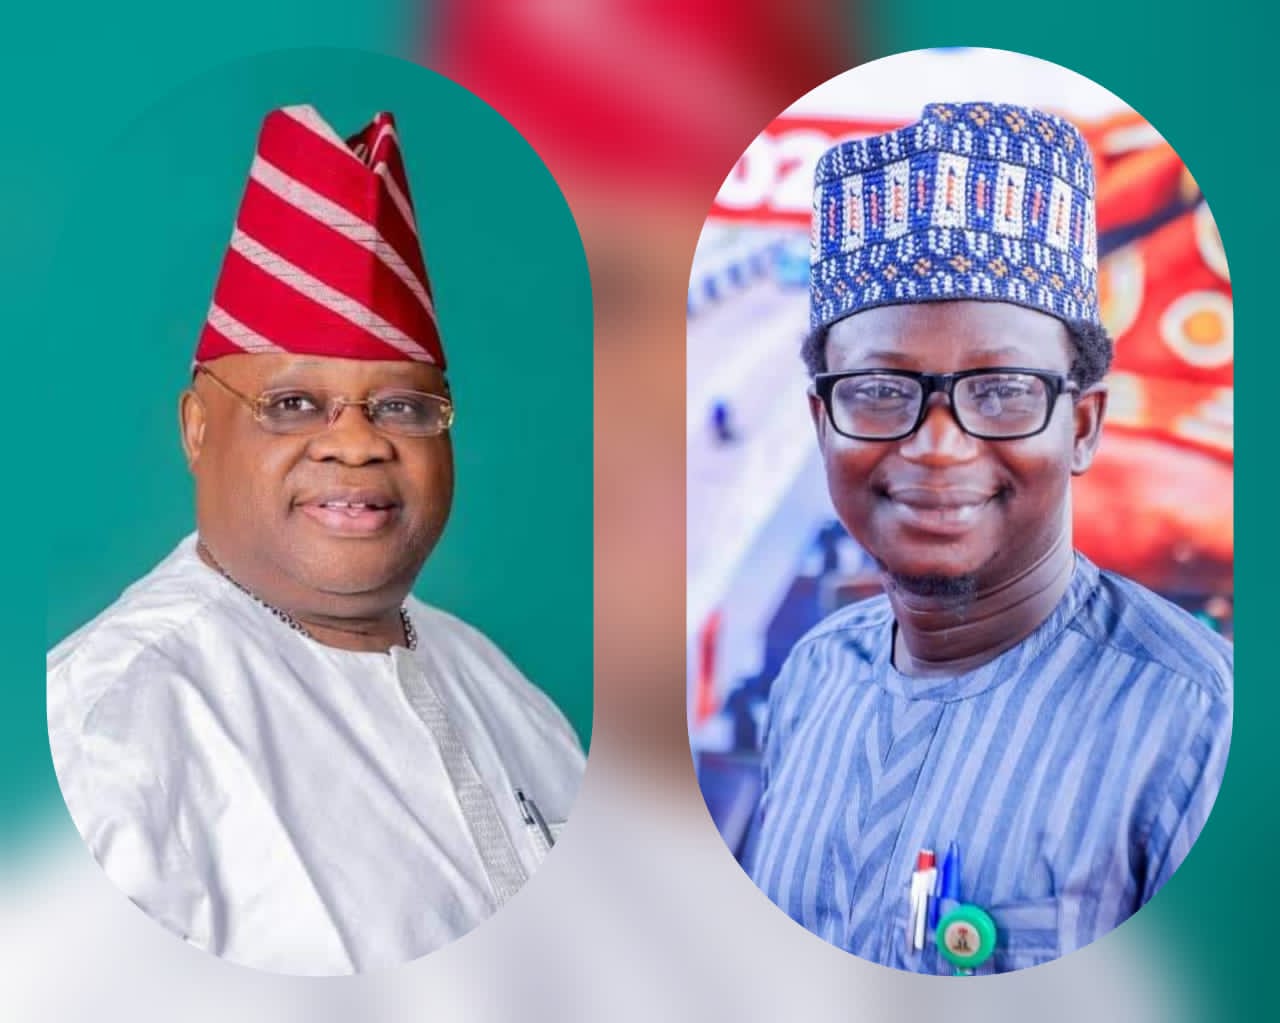 Osun: Adeleke’s government and reign of unchecked impunity, by Waheed Adekunle